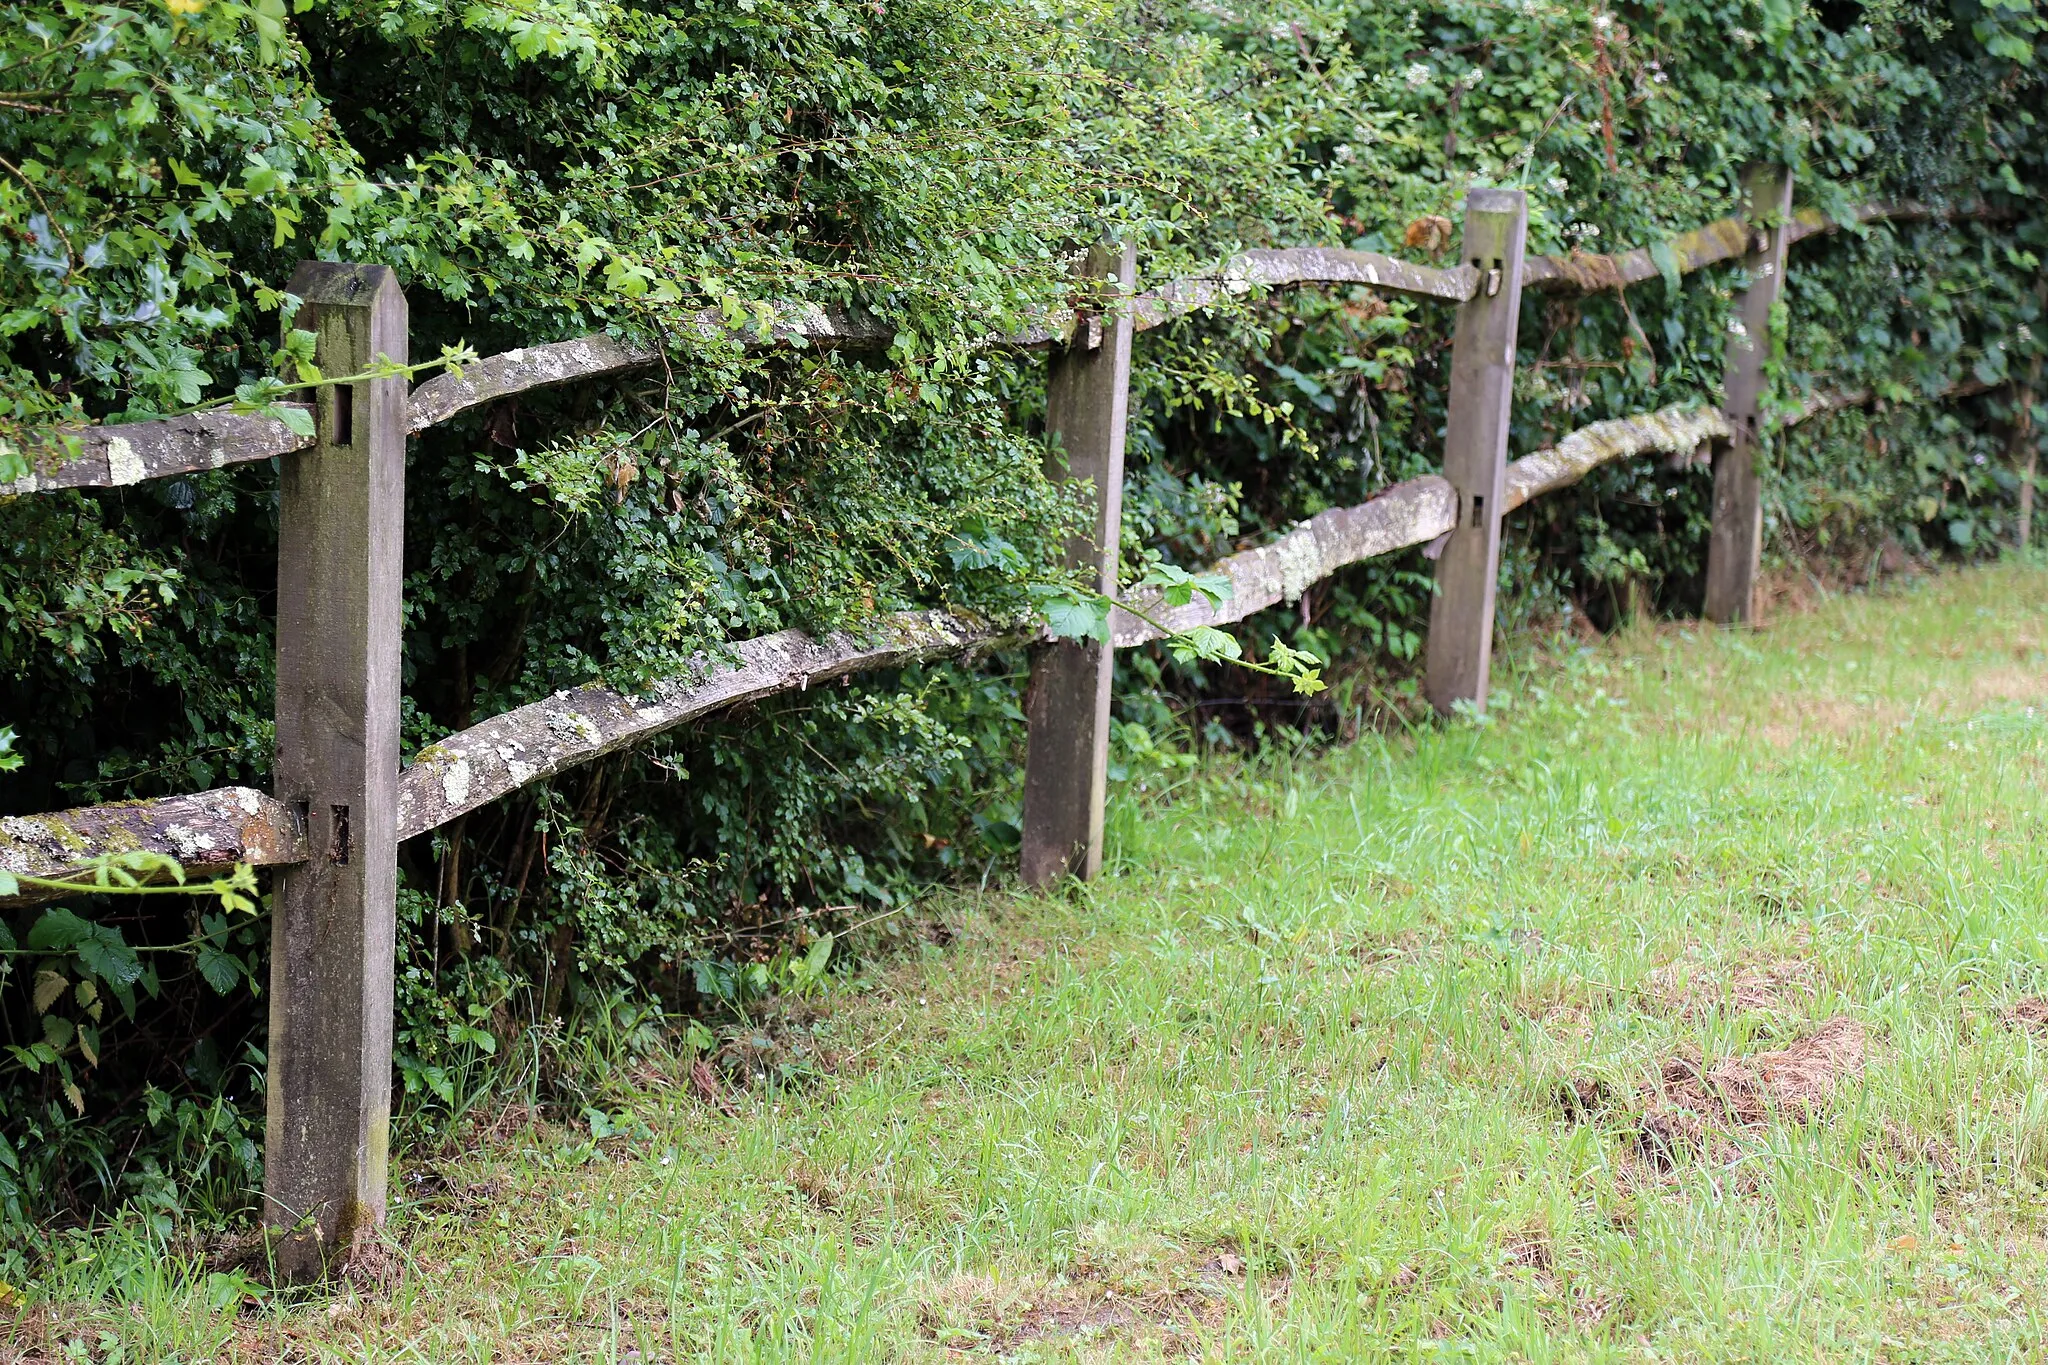 Photo showing: Fence and hedge in the hamlet of Copsale, in the Nuthurst civil parish of West Sussex, England